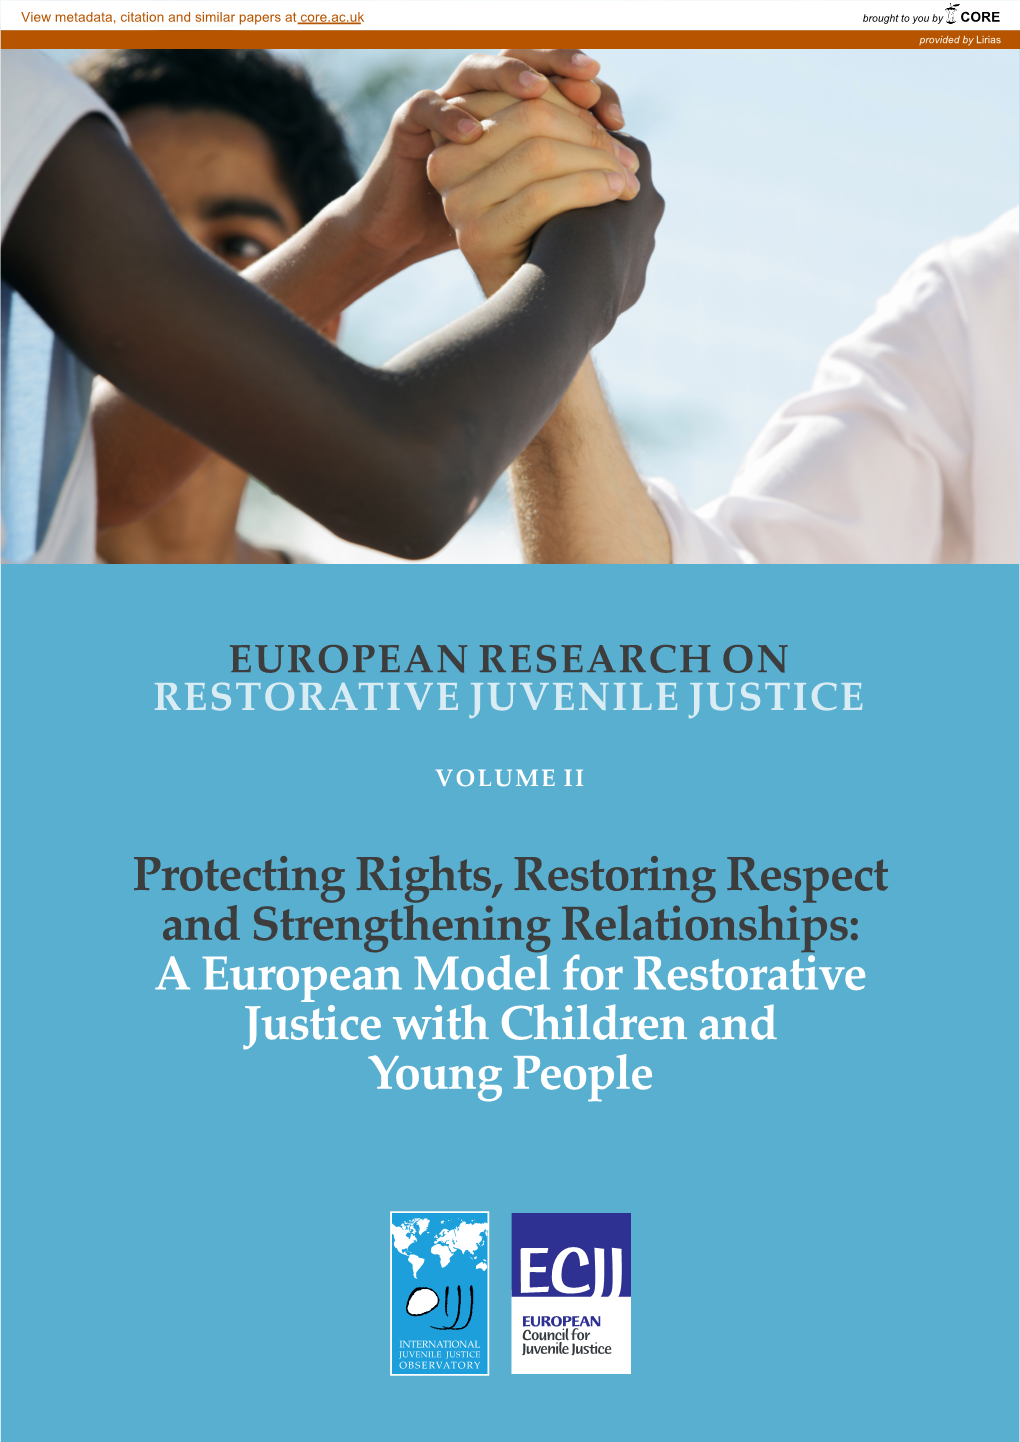 A European Model for Restorative Justice with Children and Young People